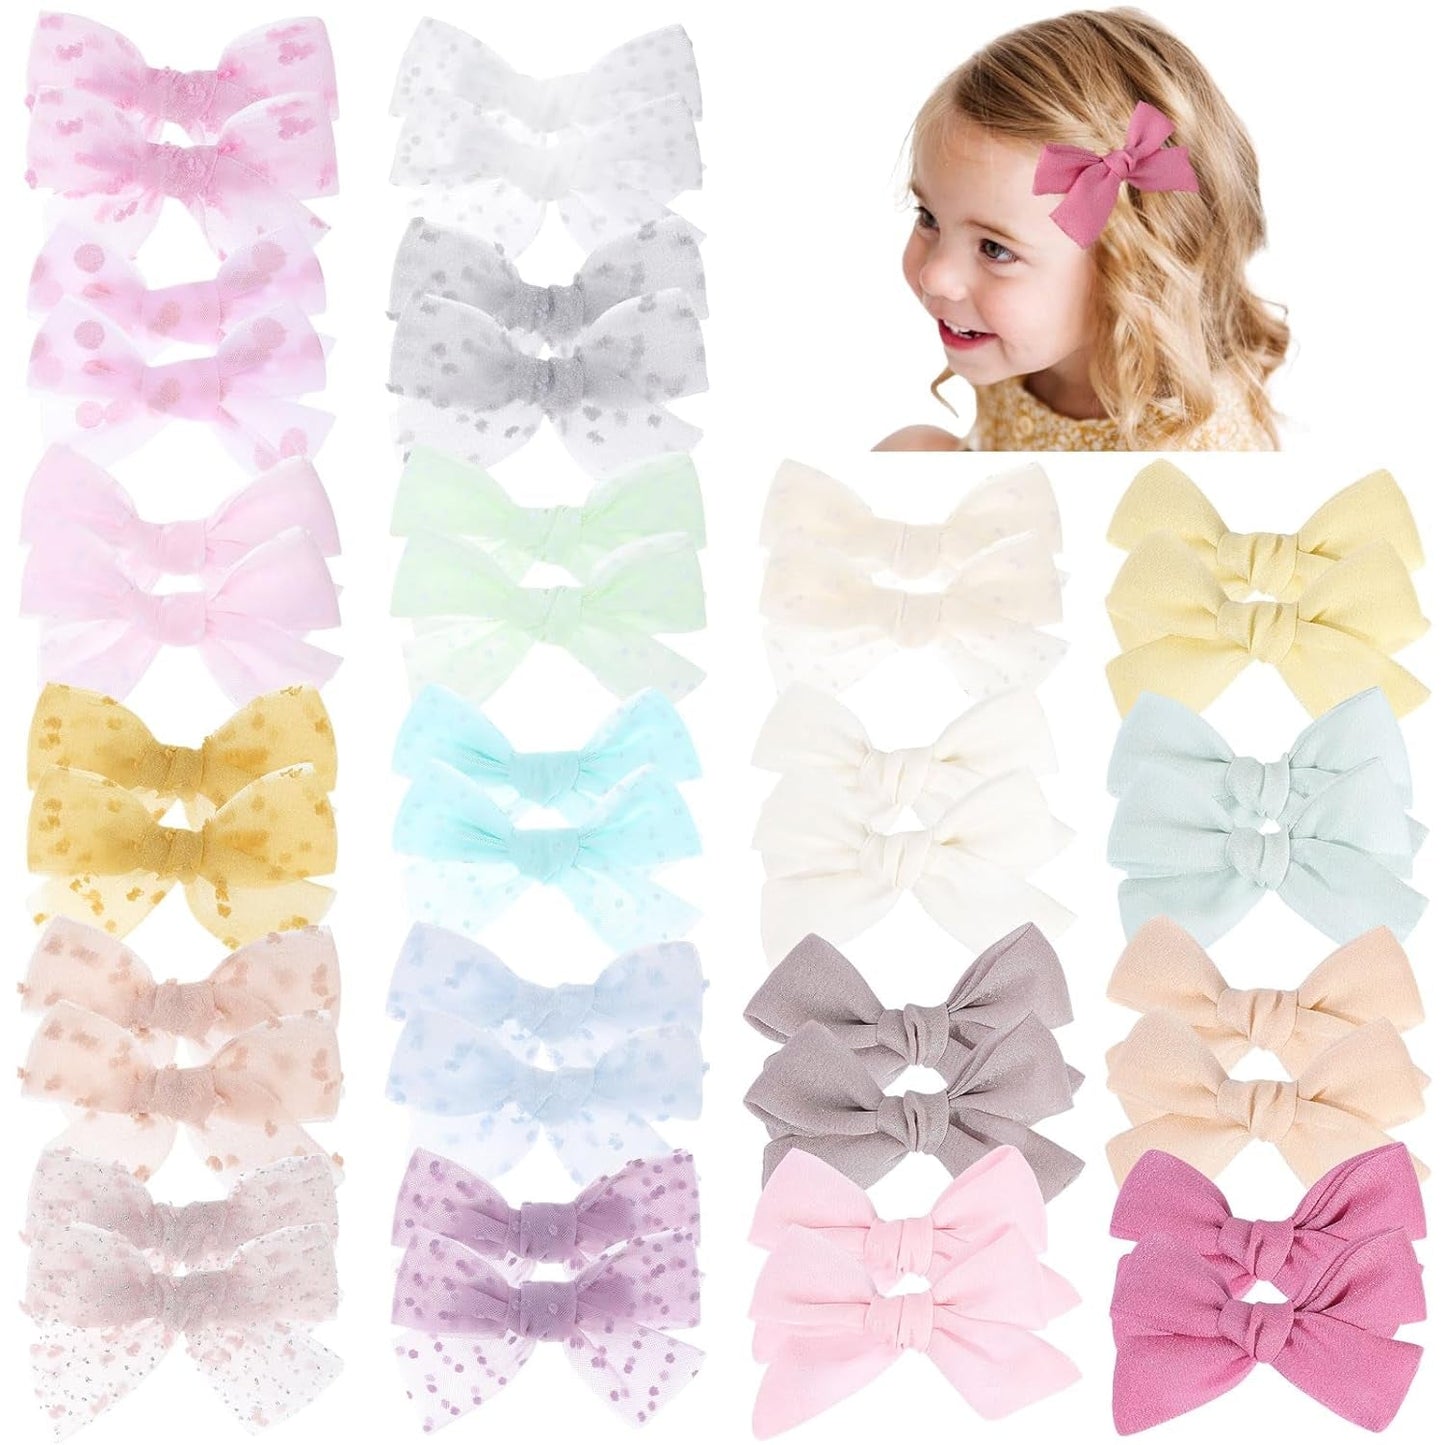 40Pcs 3.5Inch Hair Bows for Toddler Girls, Oaoleer Velvet Bows Neutral Pigtail Bows Alligator Clips Hair Barrettes Accessories for Baby Little Girls Kids in Pairs (Velvet Bows)